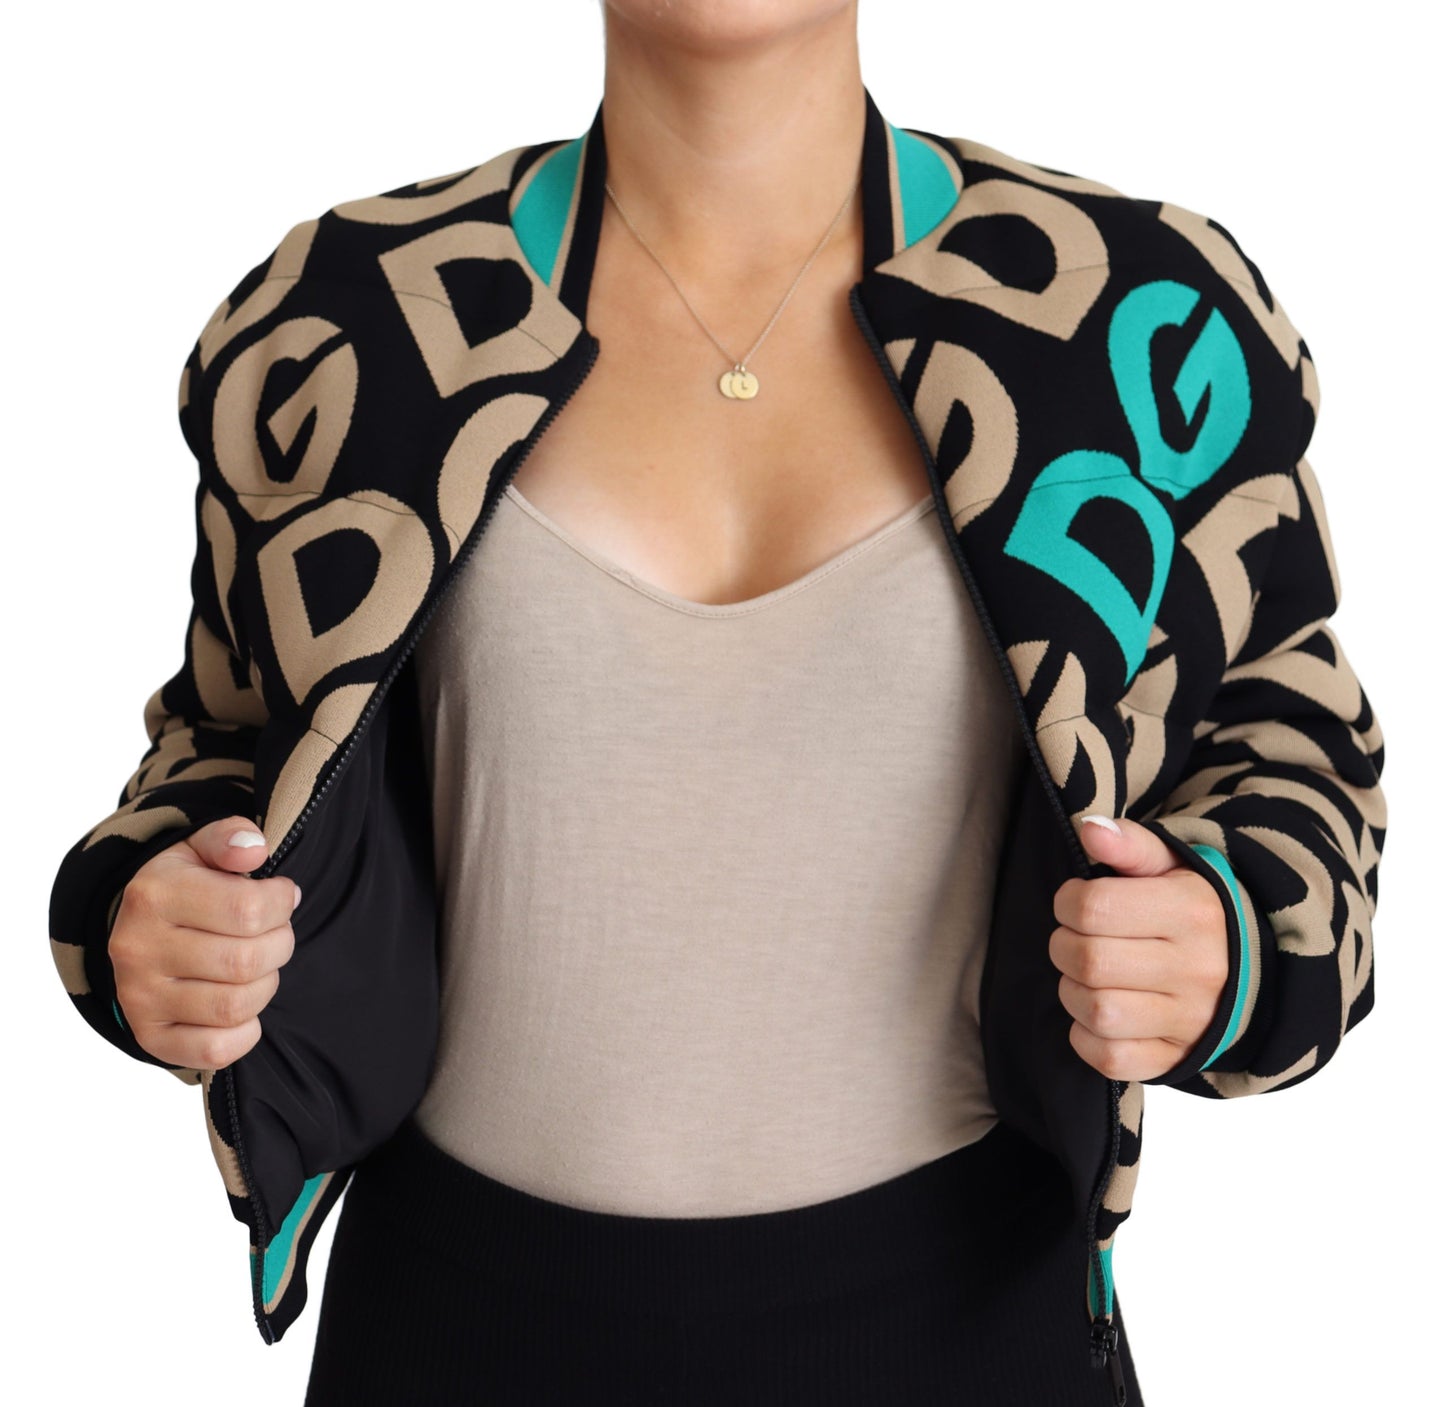 Multicolor DG Logo Print Quilted Bomber Jacket